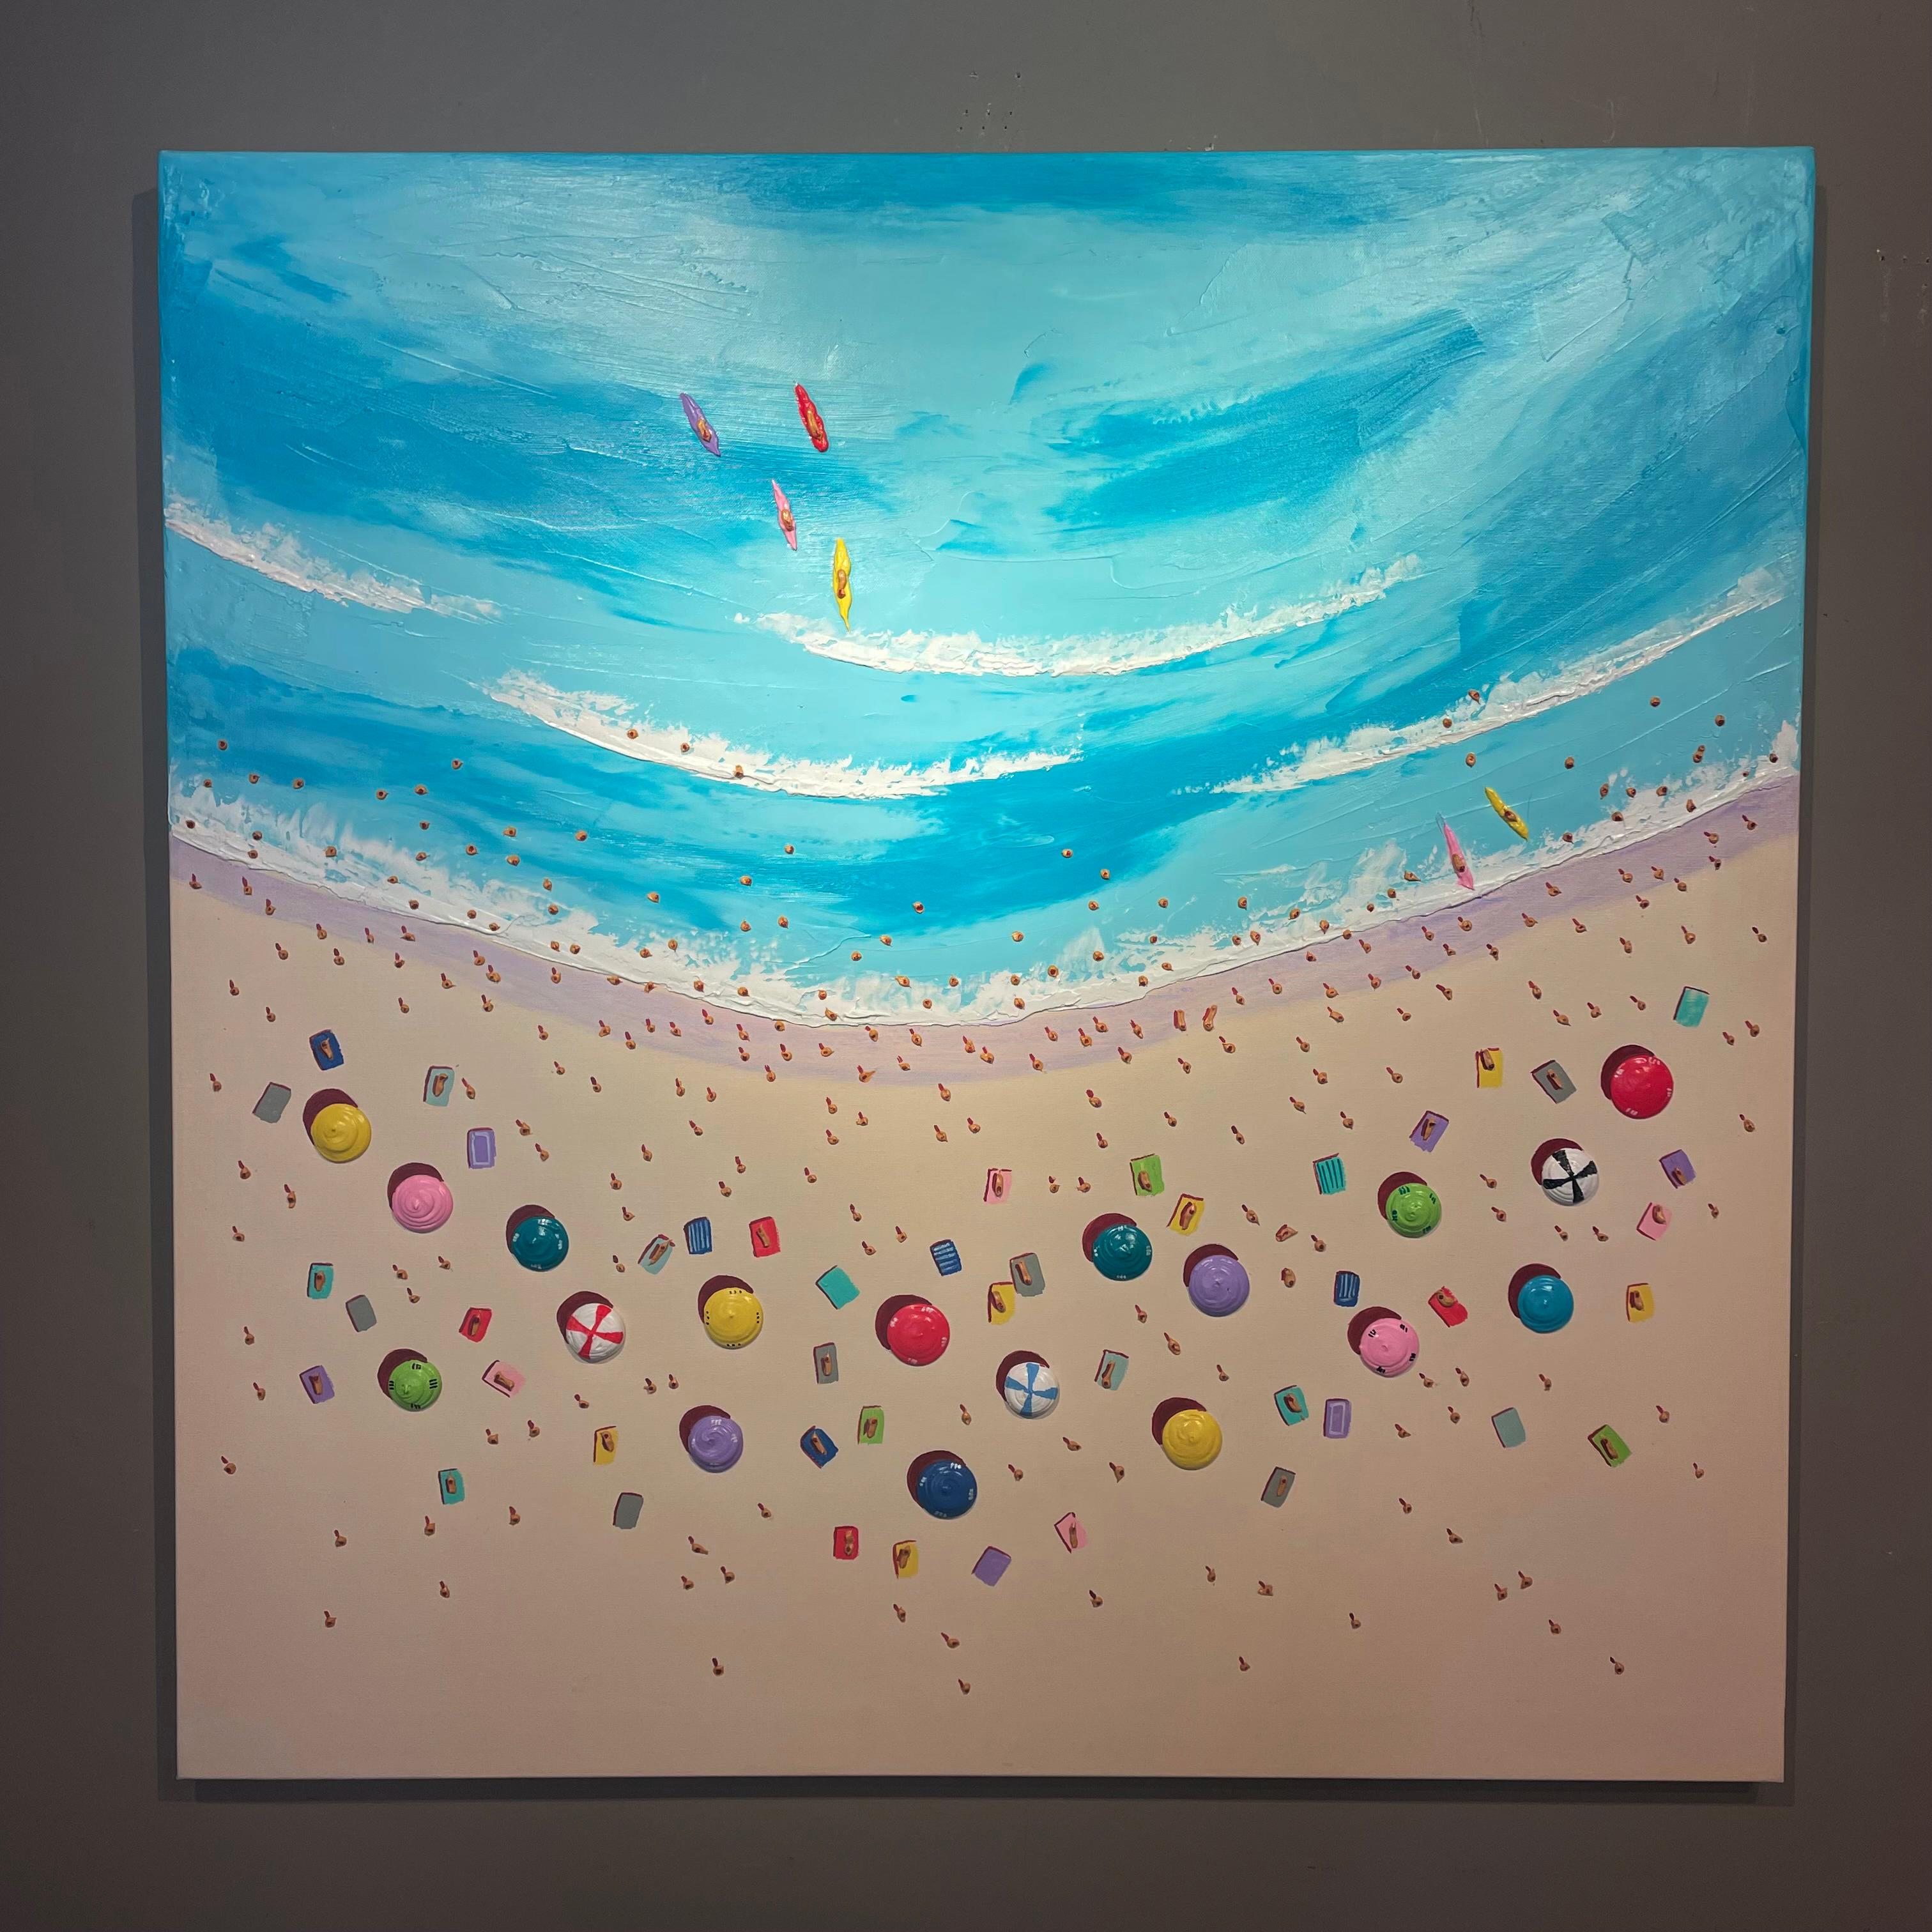 'Beach Days' is a fun and vibrant contemporary 3D painting of the beach, colourful umbrellas, people the sea and sand by Max Todd. Inspired by beach holidays Todd has created a work that is vibrant, colourful and bold!

Max Todd uses contemporary